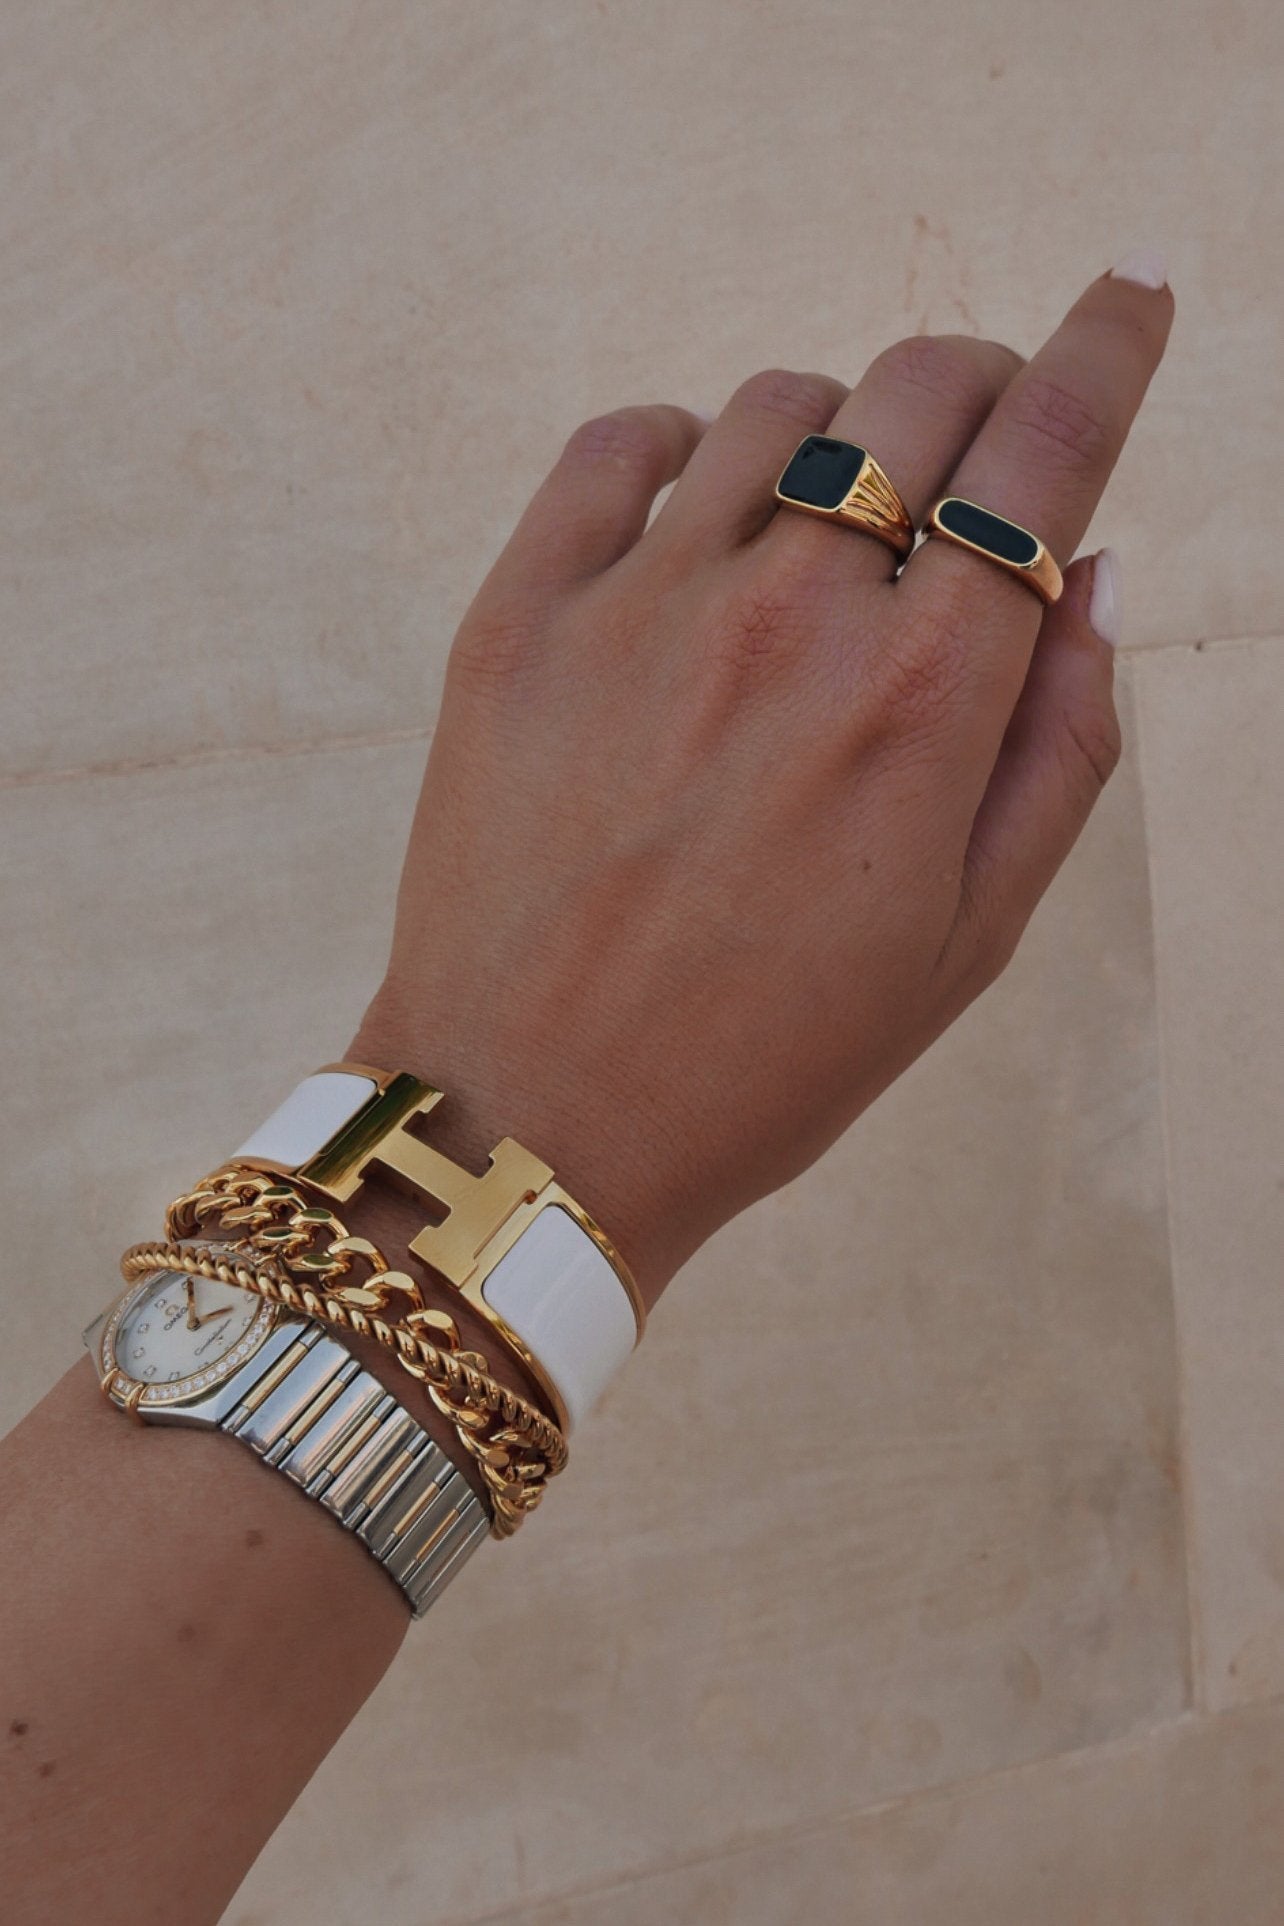 Emilia Cuff - Boutique Minimaliste has waterproof, durable, elegant and vintage inspired jewelry